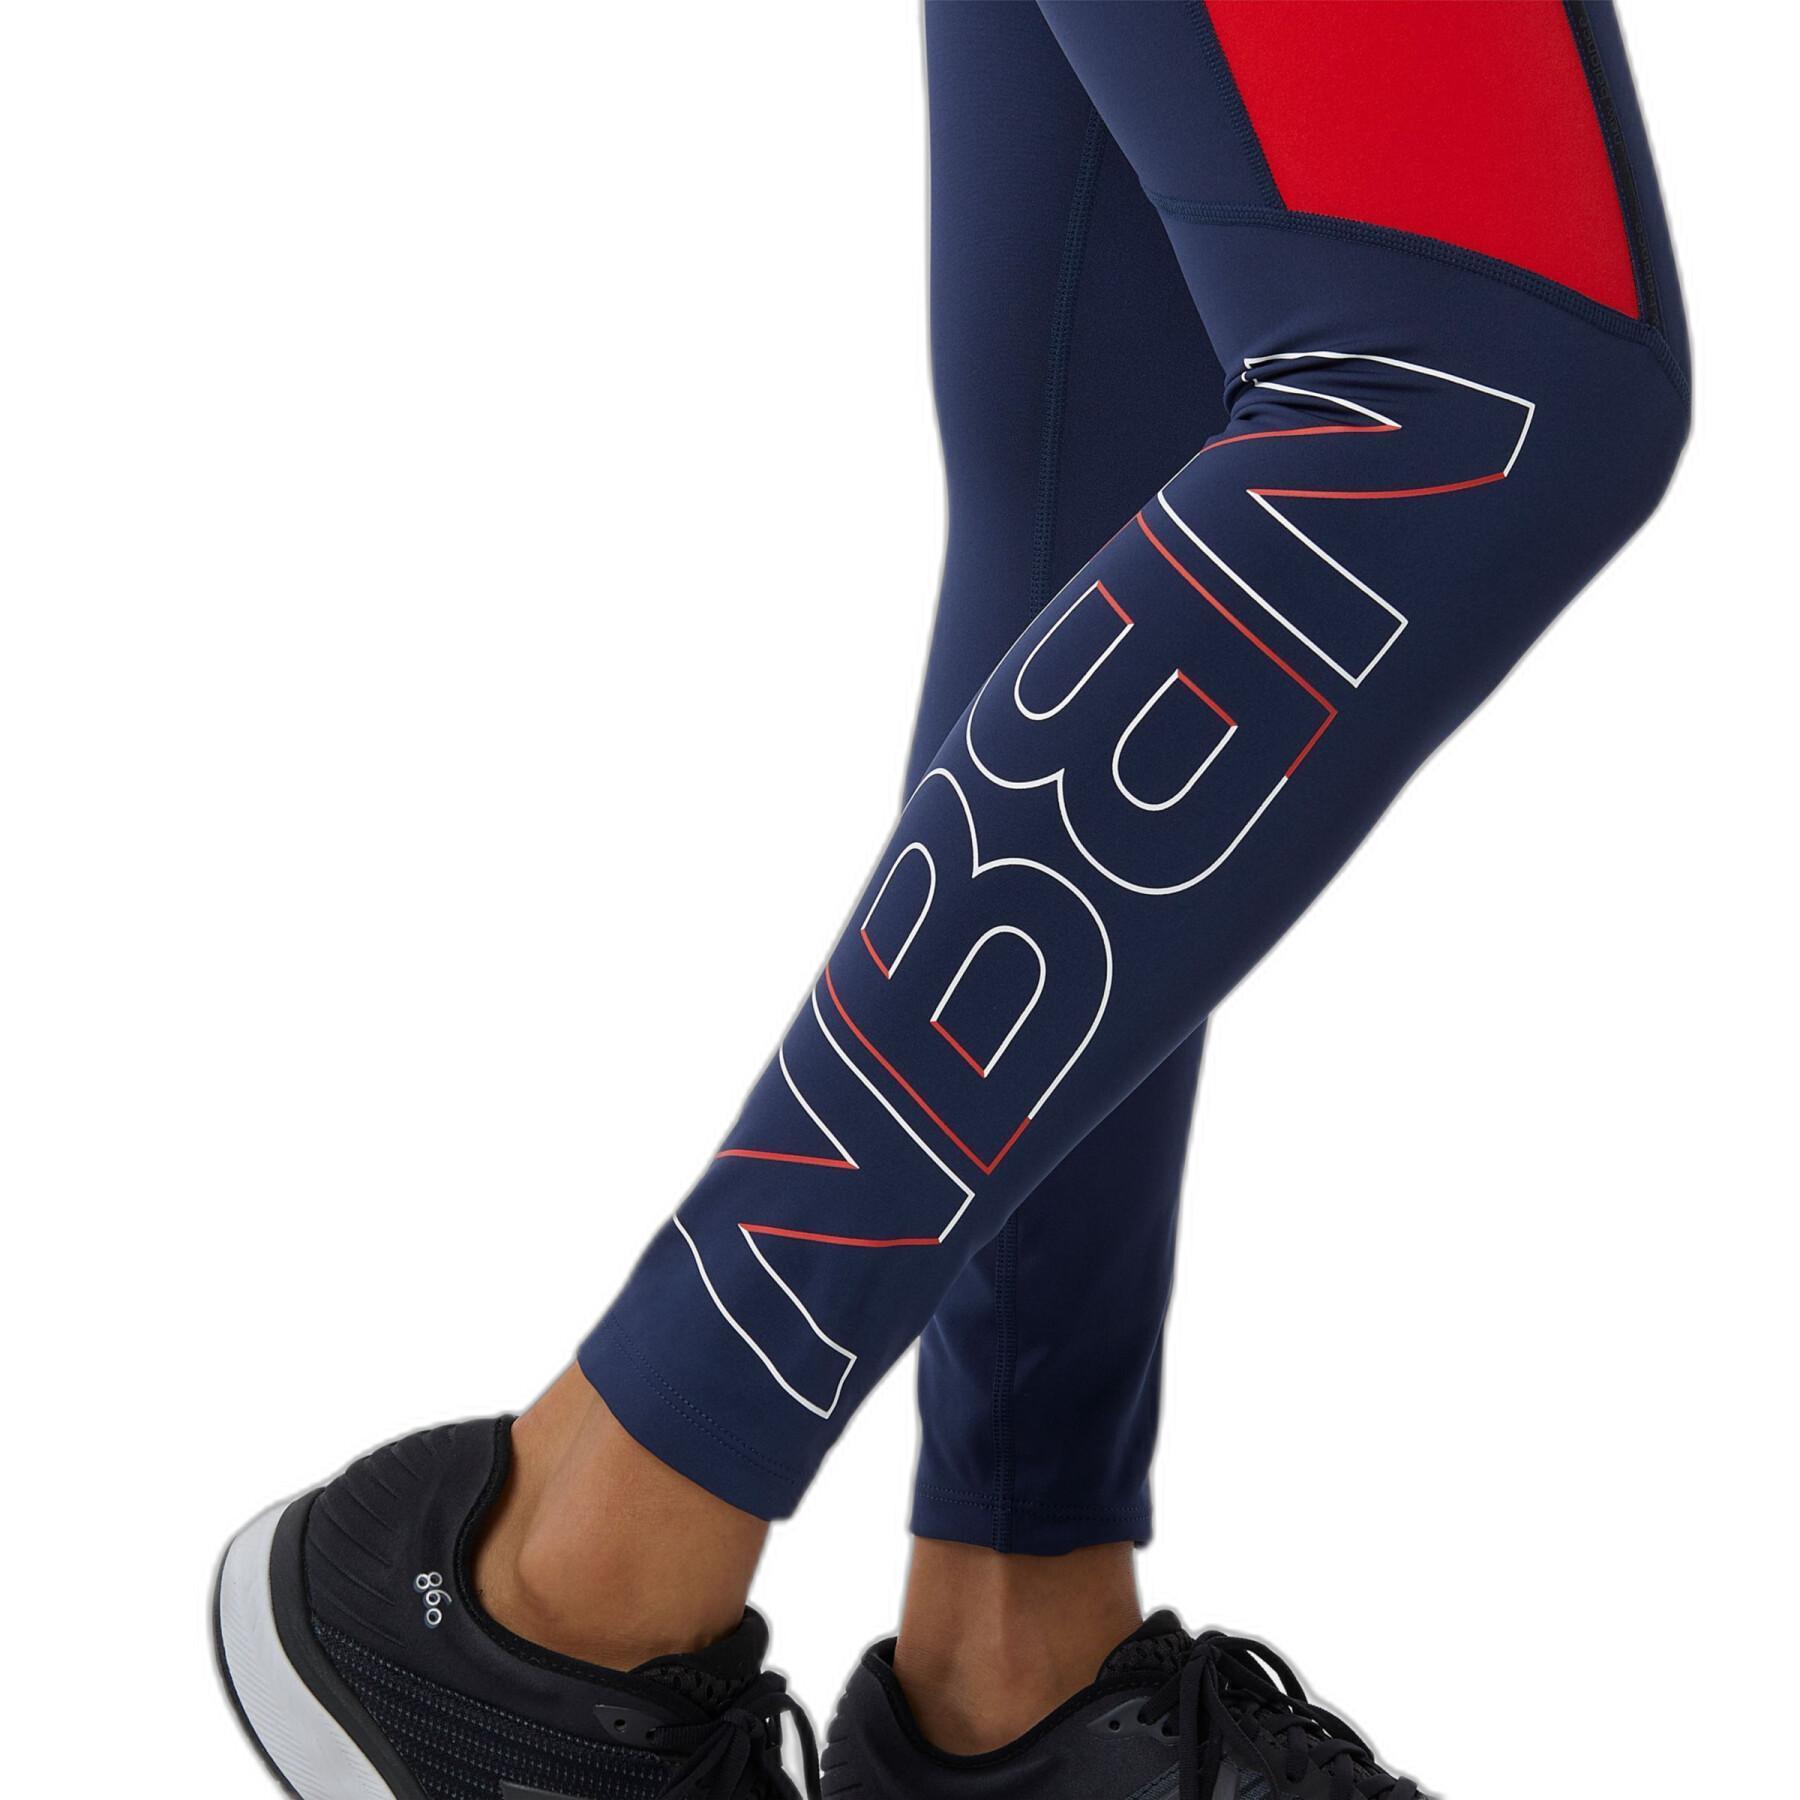 Dames legging 7/8 New Balance Accelerate Pacer